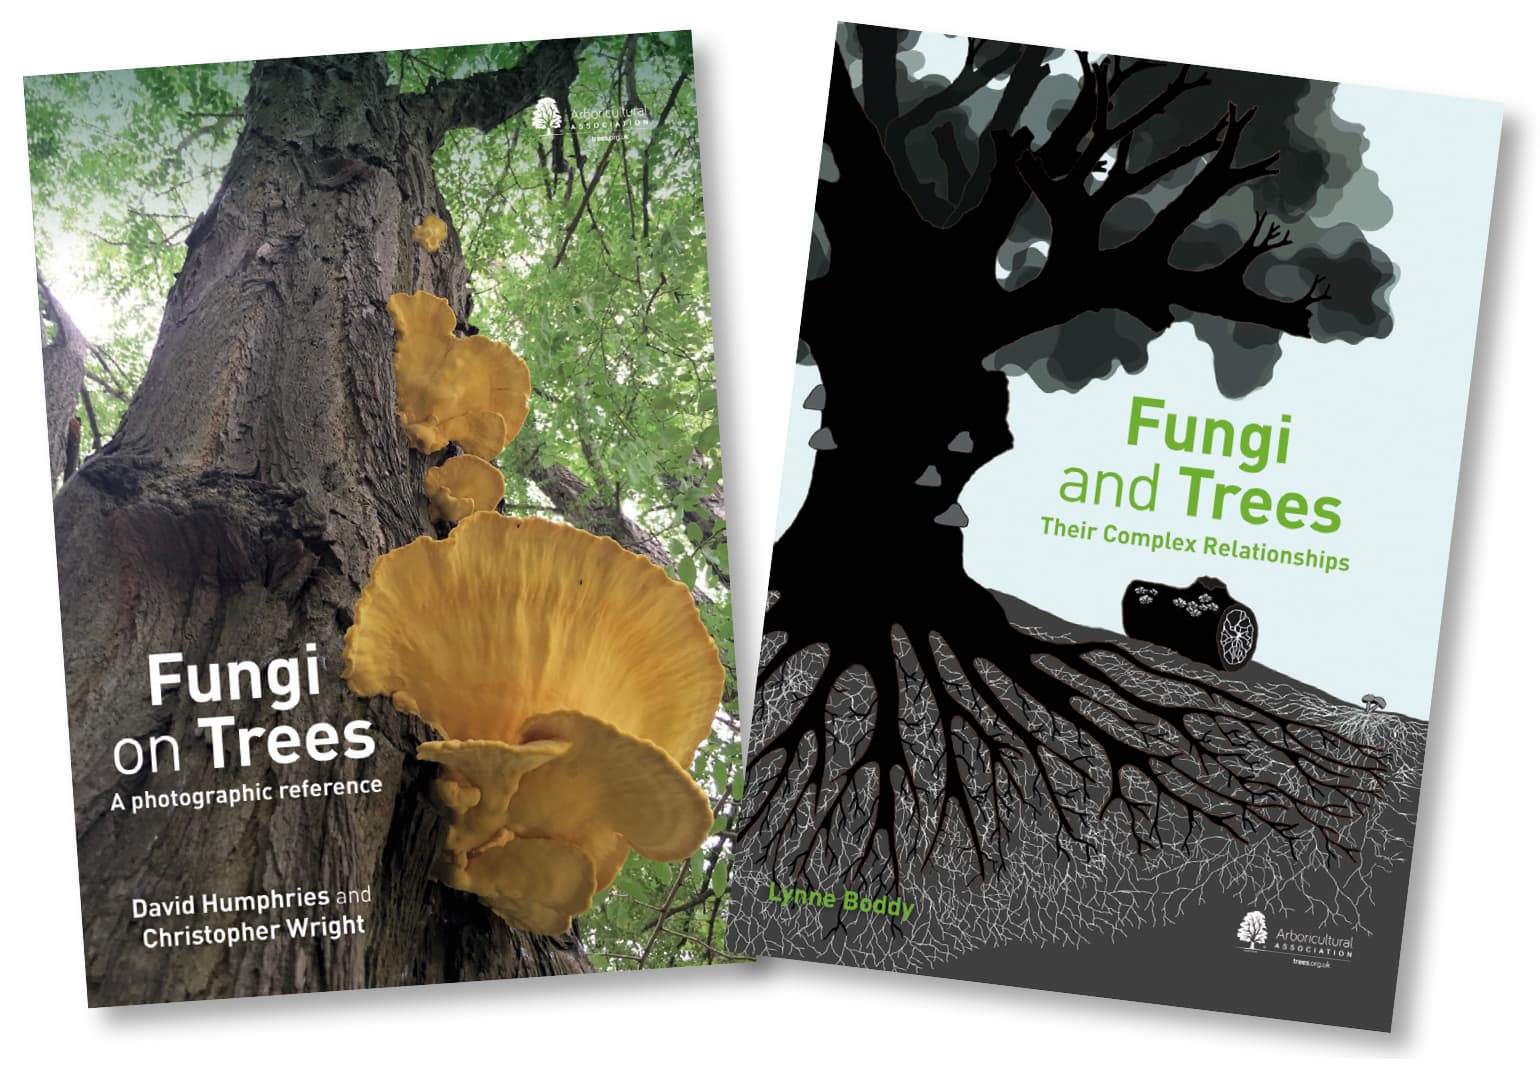 Fungi and Trees: Their Complex Relationships and Fungi on Trees: A Photographic Reference